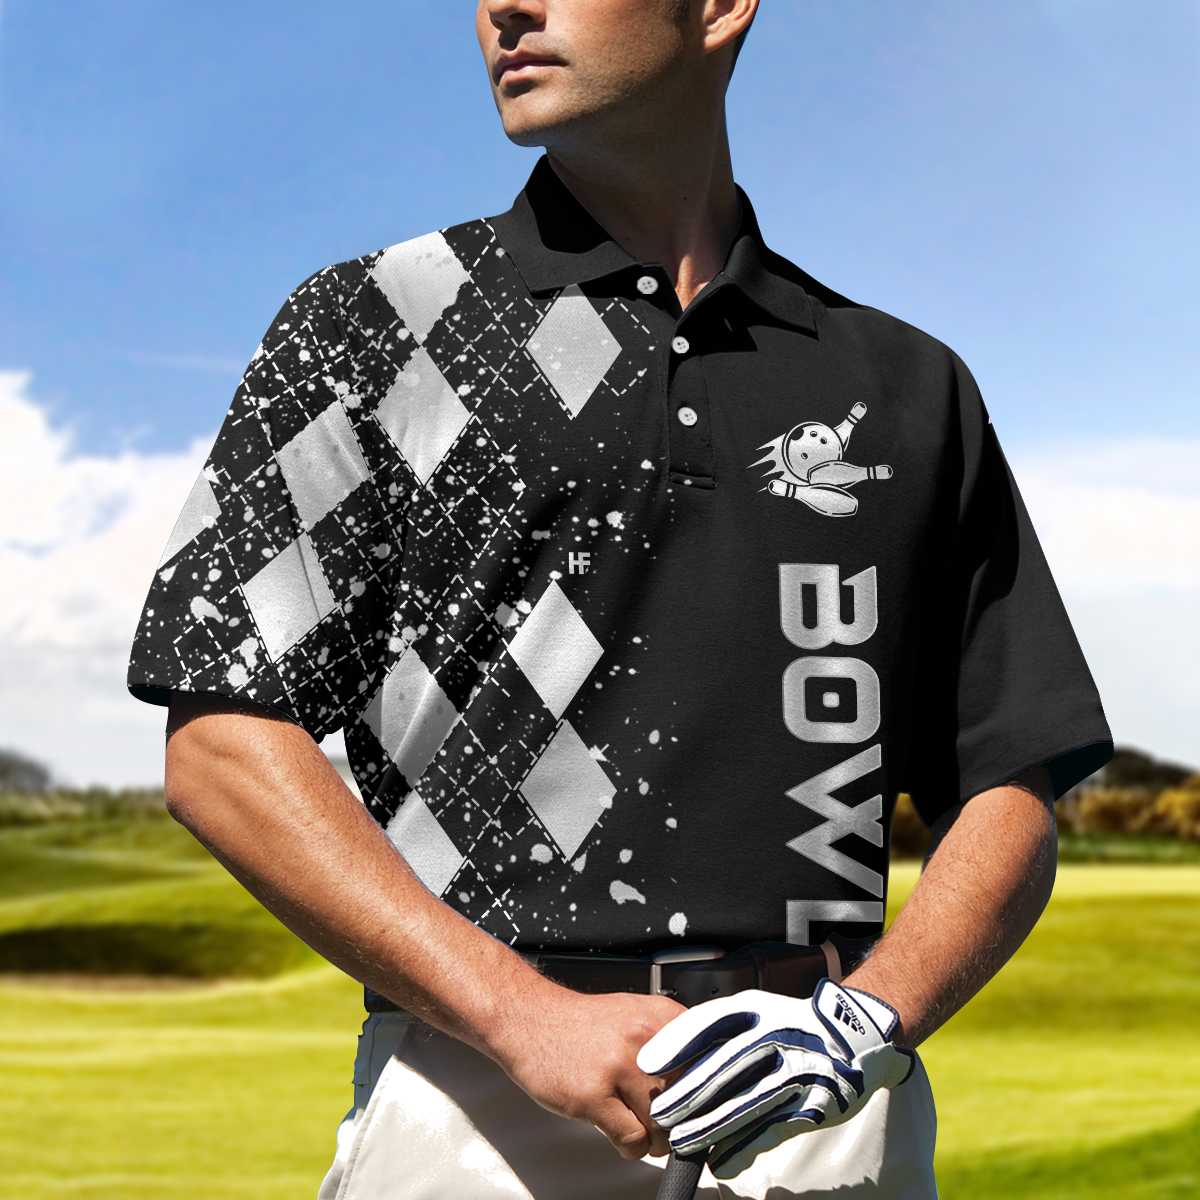 Silver Bowling Polo Shirt/ Black And Silver Argyle Pattern Bowling Shirt For Men Coolspod